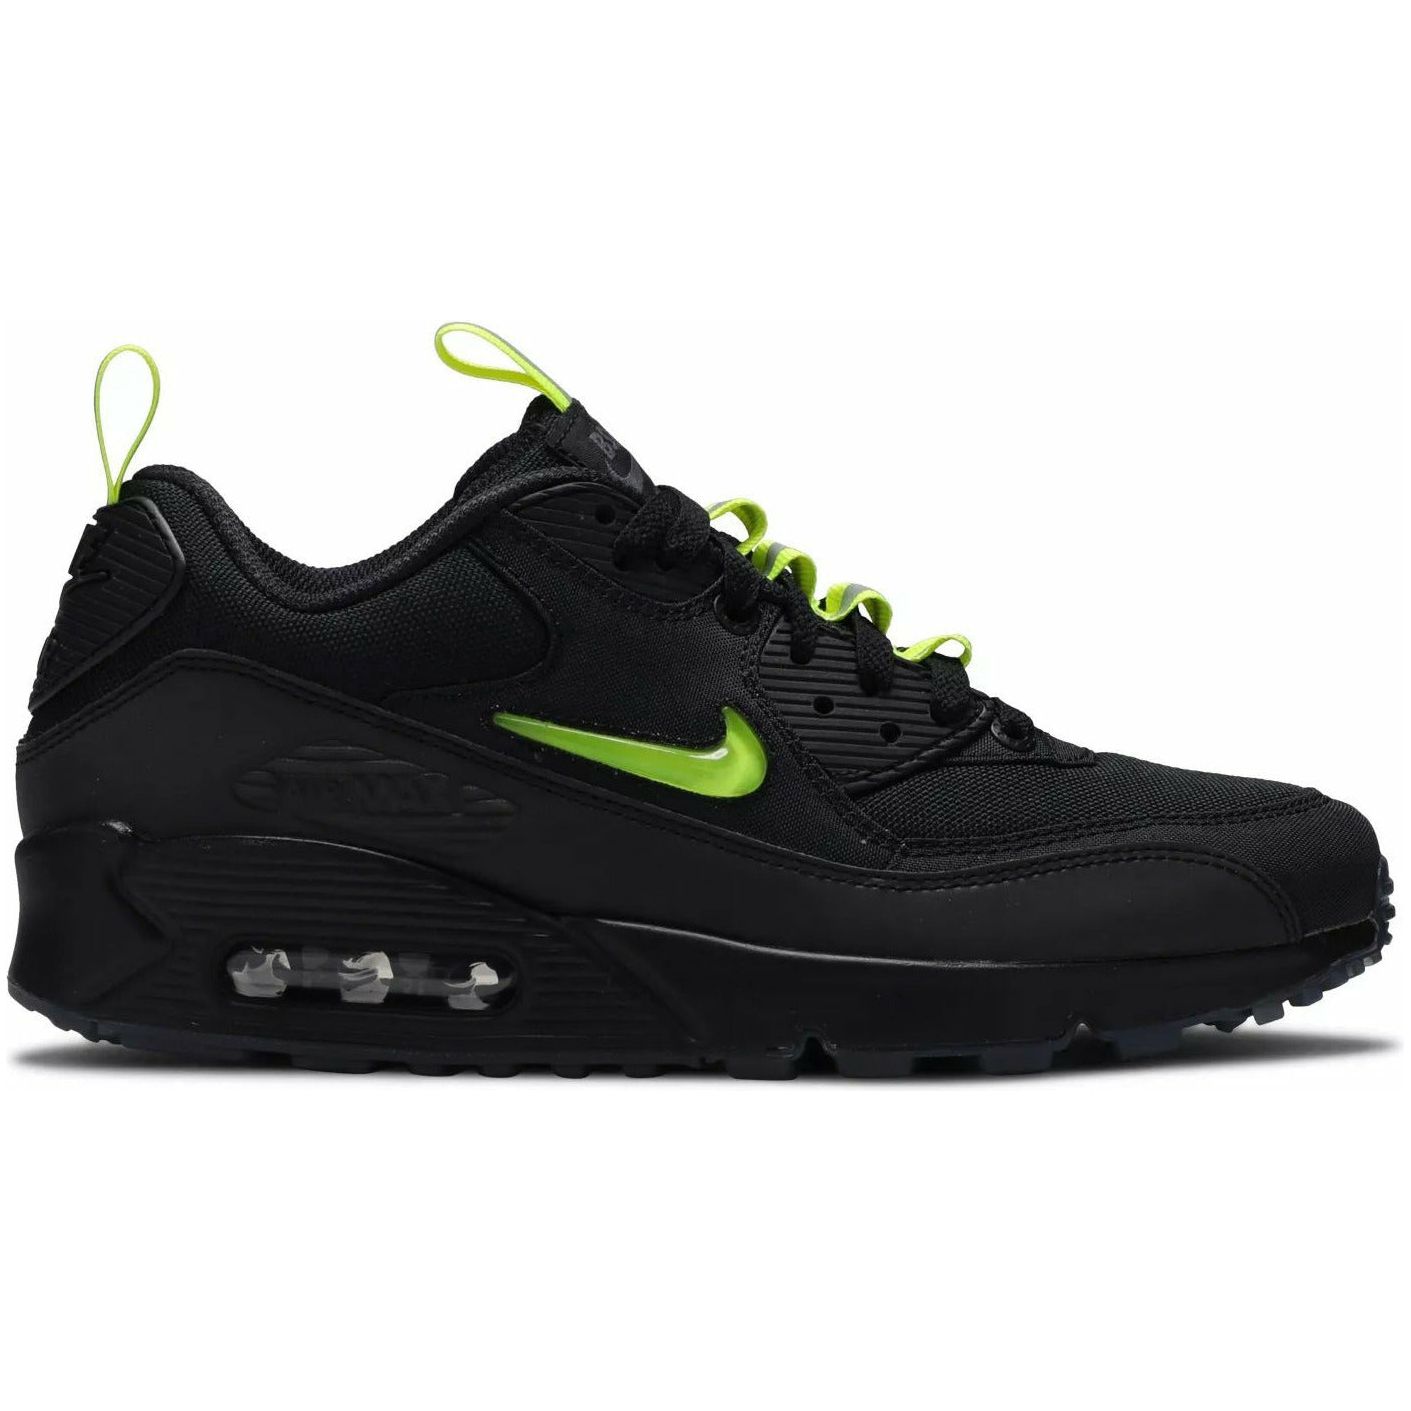 Nike Air Max 90 The Basement Manchester by Nike from £194.00